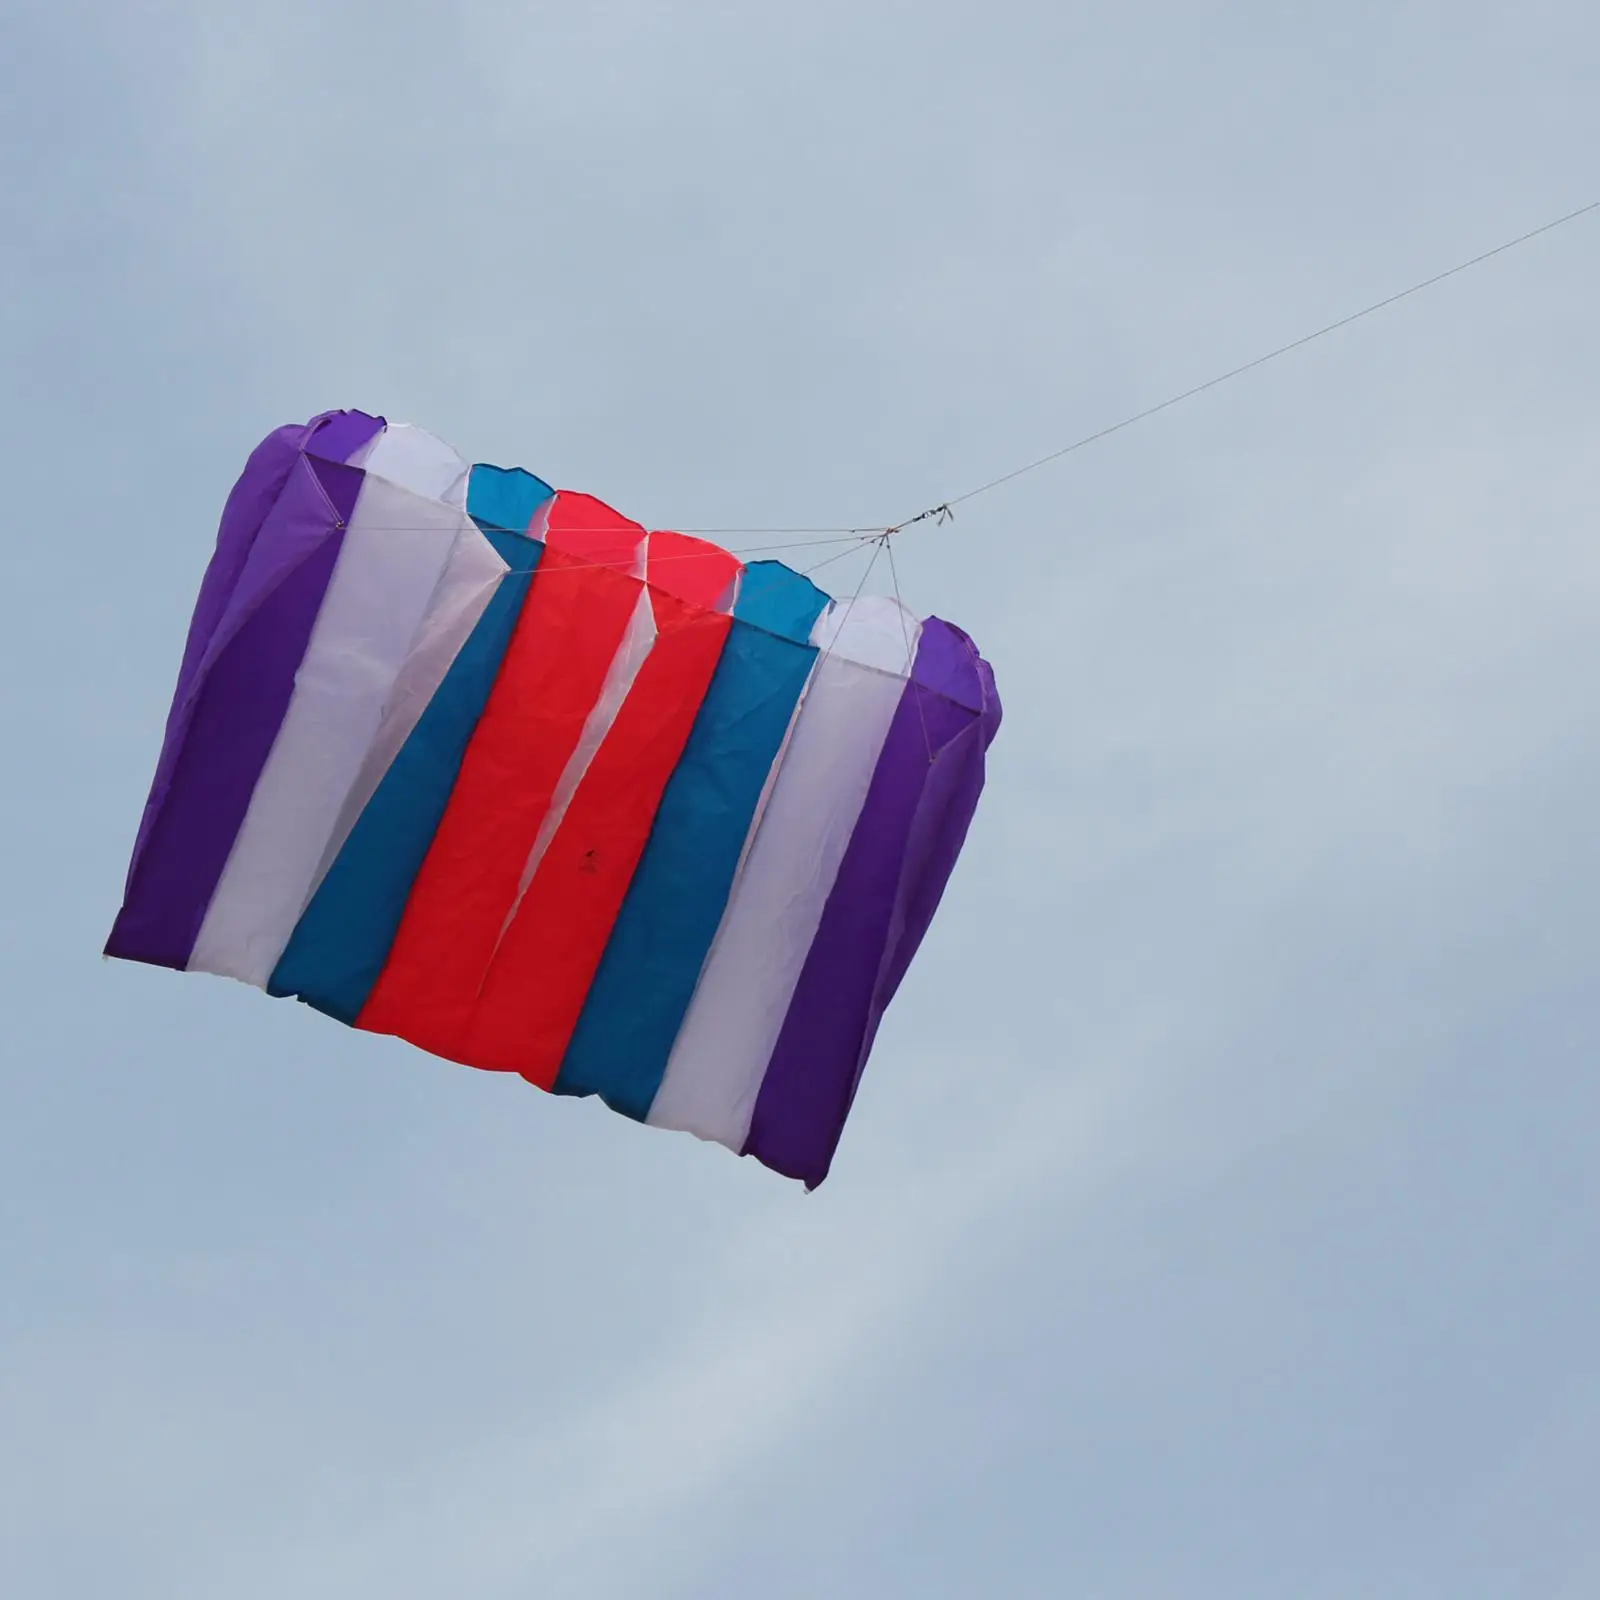 Single Line Kites and 9.84ft Flying Line for Kids and Adults Beginners